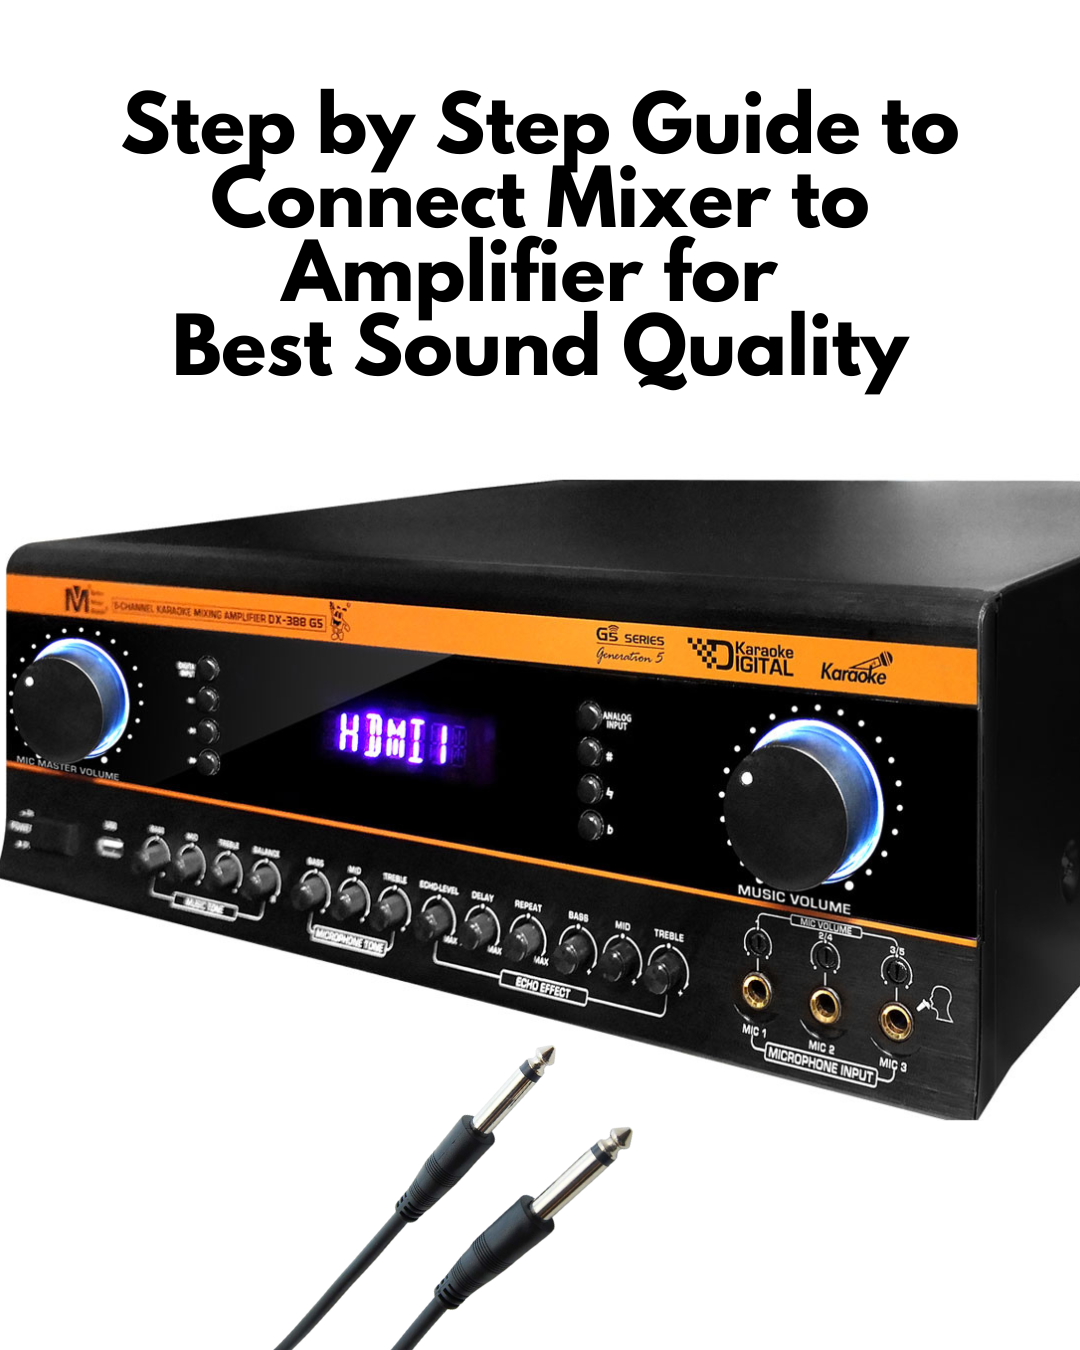 Connecting Your Mixer to Amplifier for Quality Sound